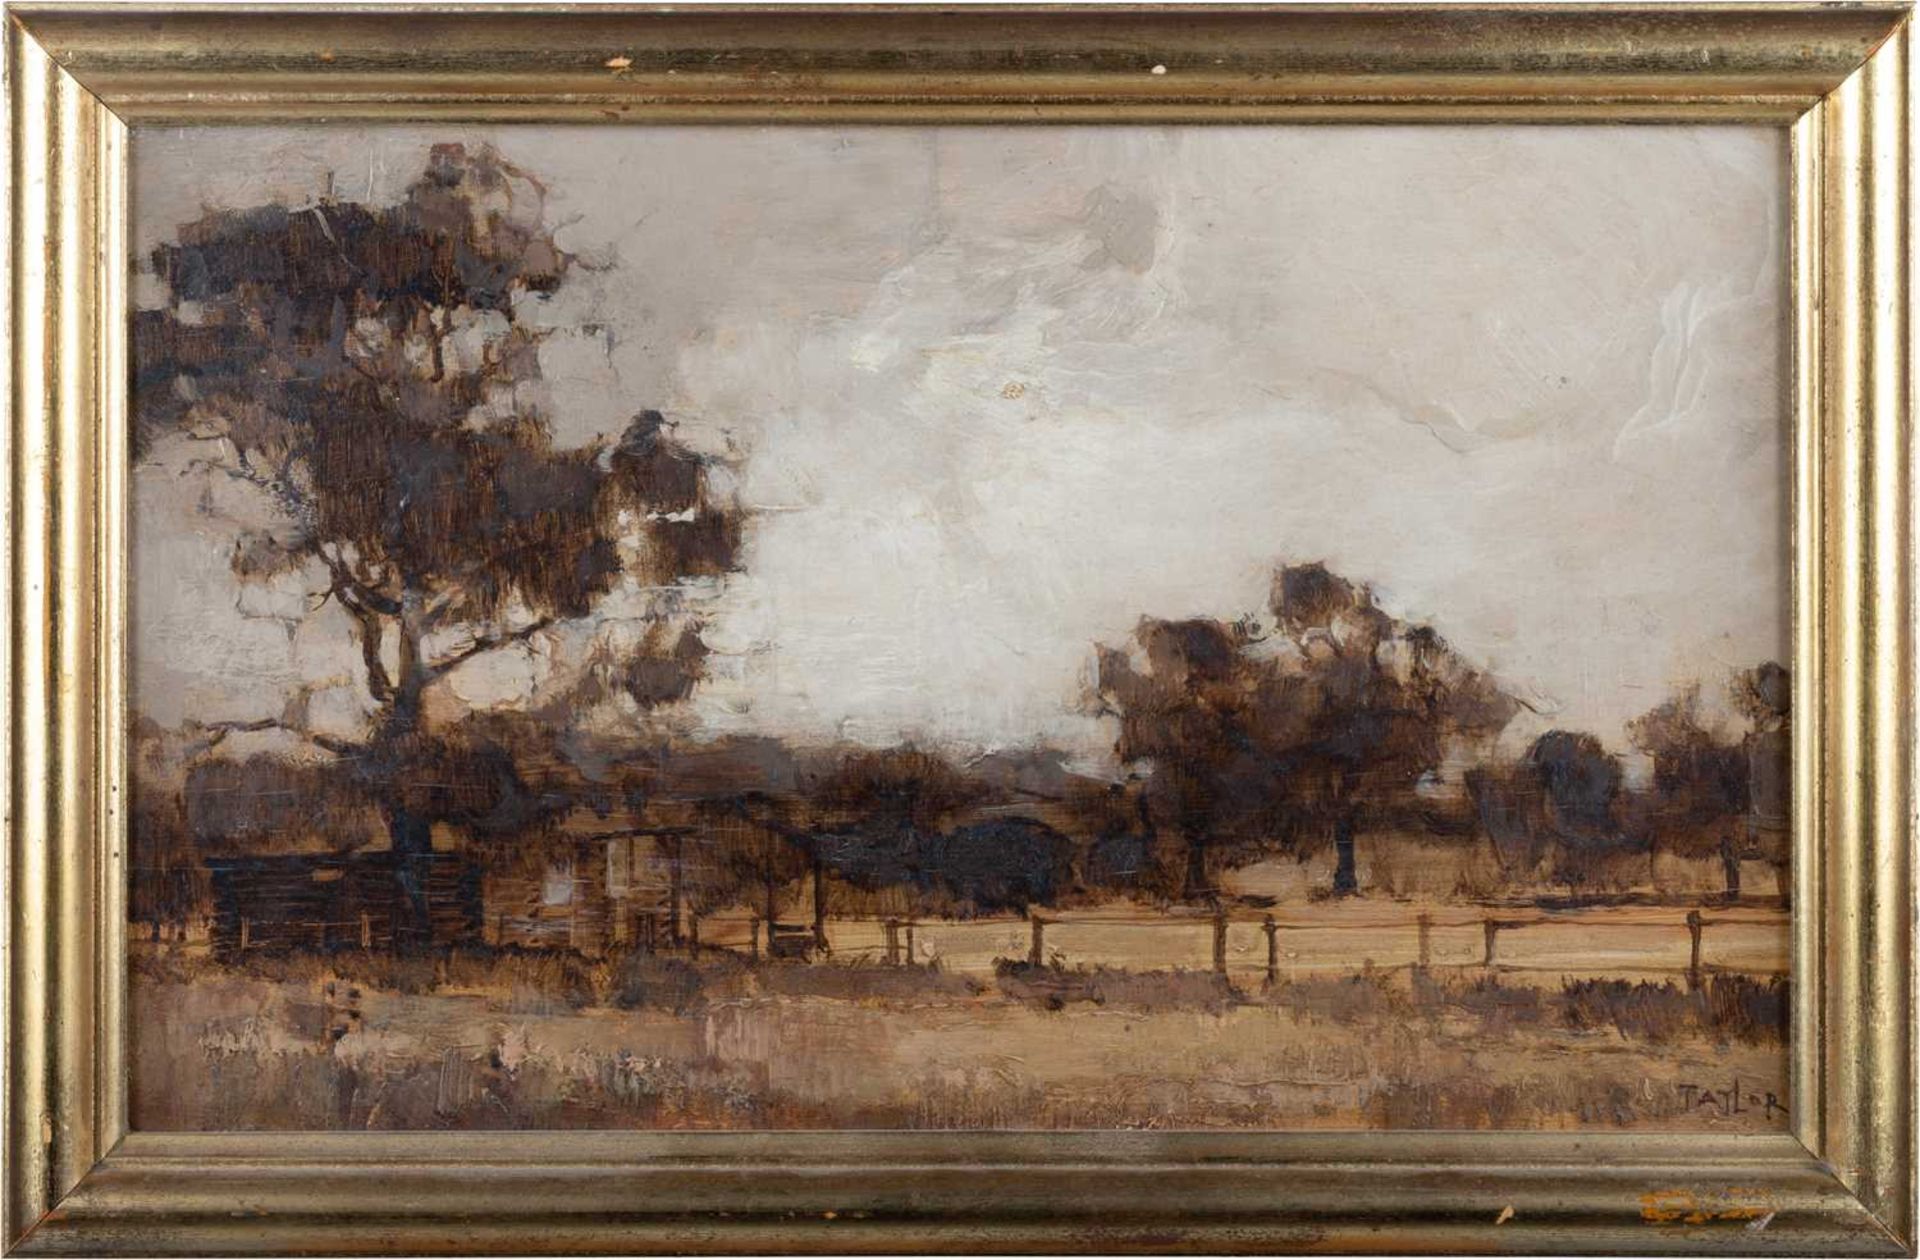 JAMES TAYLOR (BORN 1930) PAIR OF KENTISH LANDSCAPES - SOUTH AFRICA - Image 2 of 5